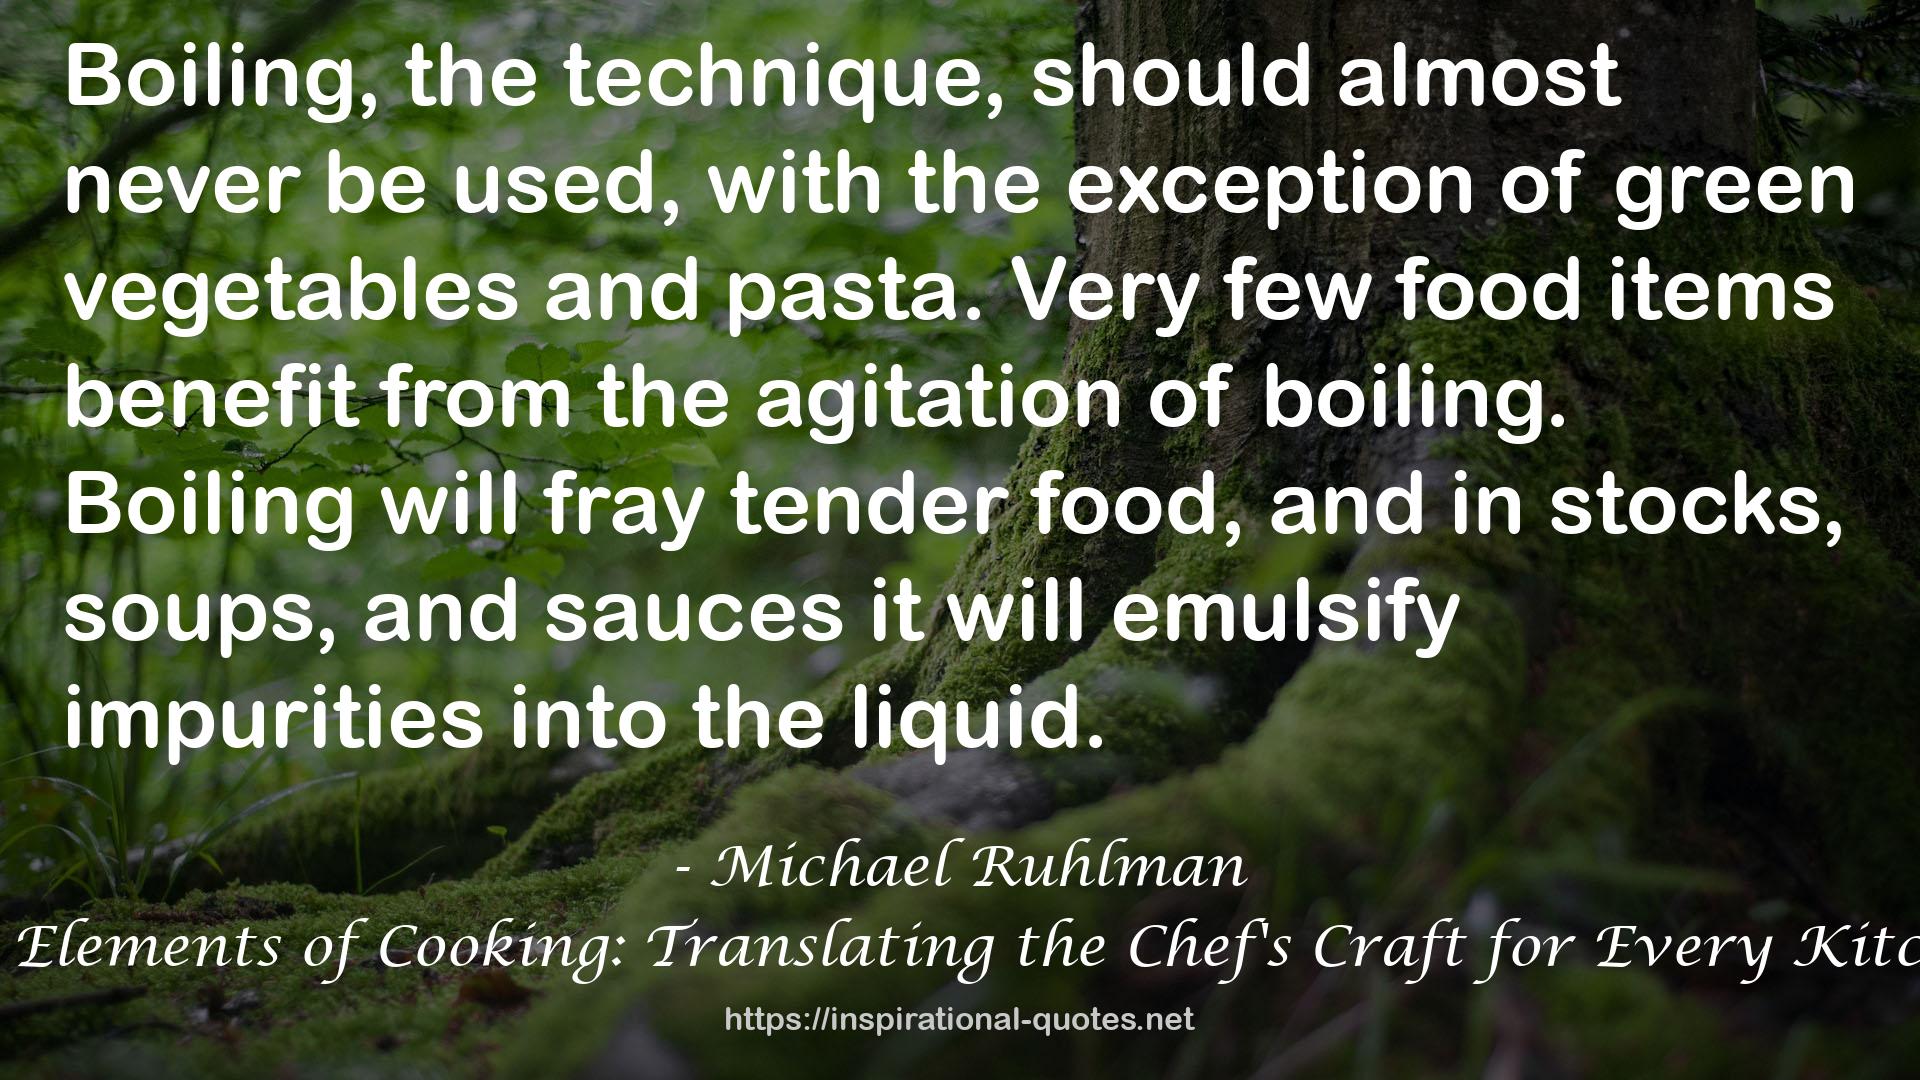 The Elements of Cooking: Translating the Chef's Craft for Every Kitchen QUOTES